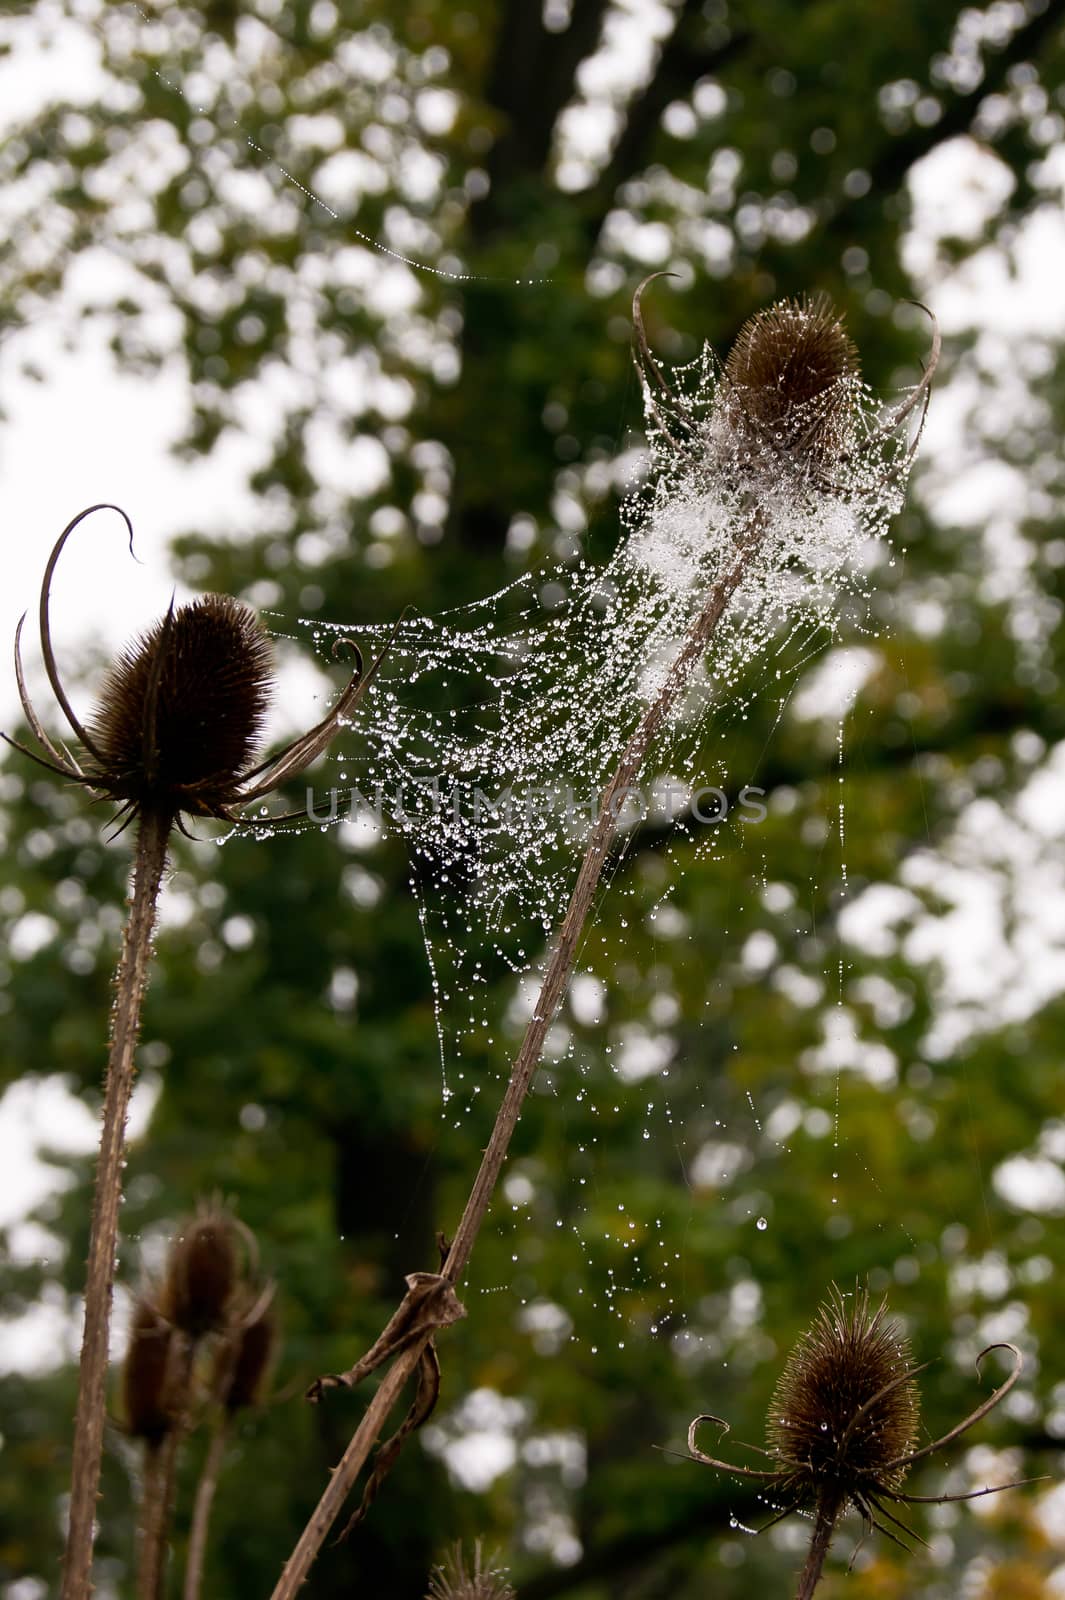 He struggled with water drops on spider web thistle.